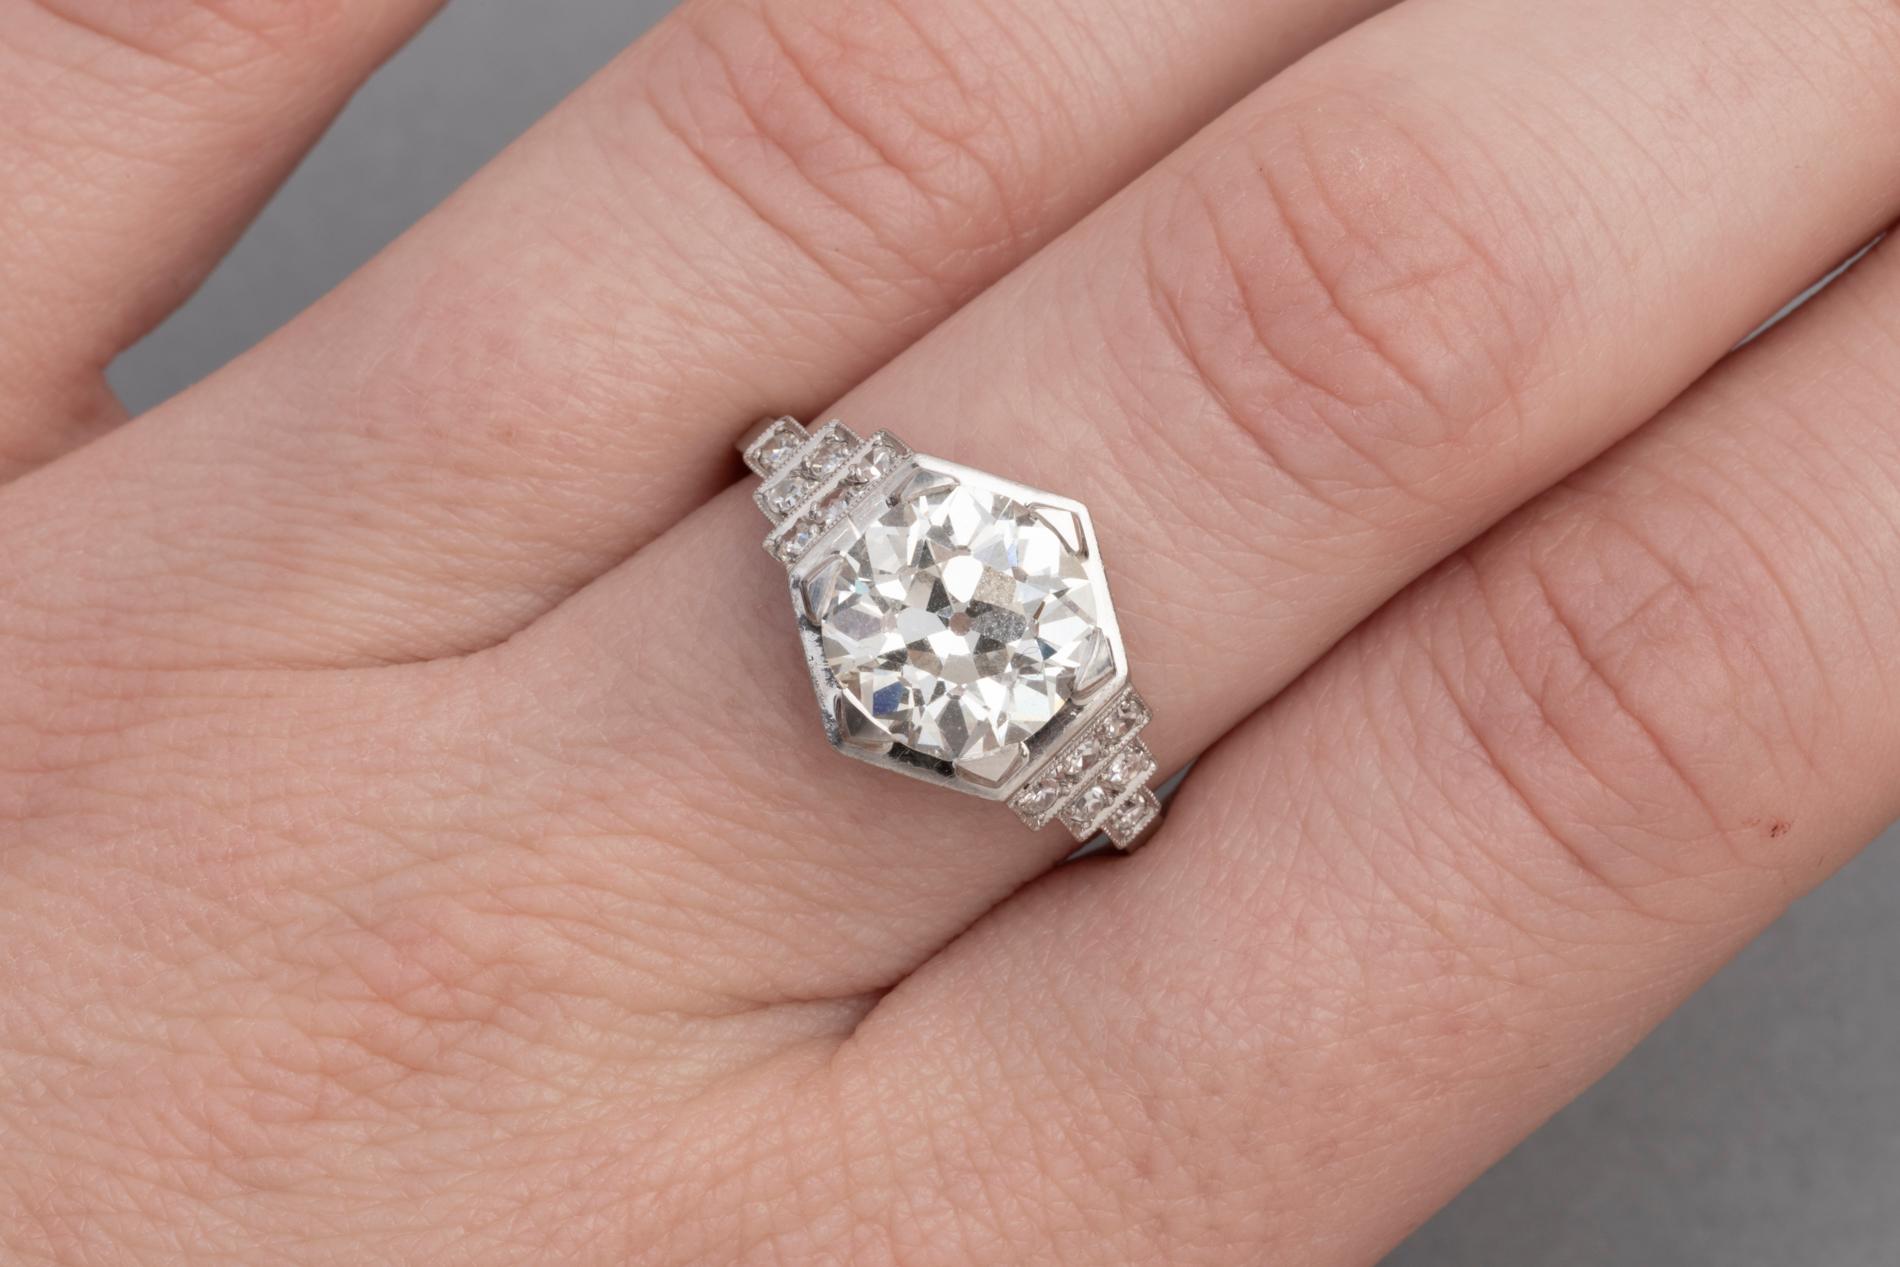 3.81 Carat French Art Deco Ring, Platinum and Diamonds

Very beautiful ring, made in France circa 1930.  The design is elegant.
The ring is mounted in Platinum and set  with a beautiful Round cut Diamond of 3.81 carats.
 K colour and VS clarity.